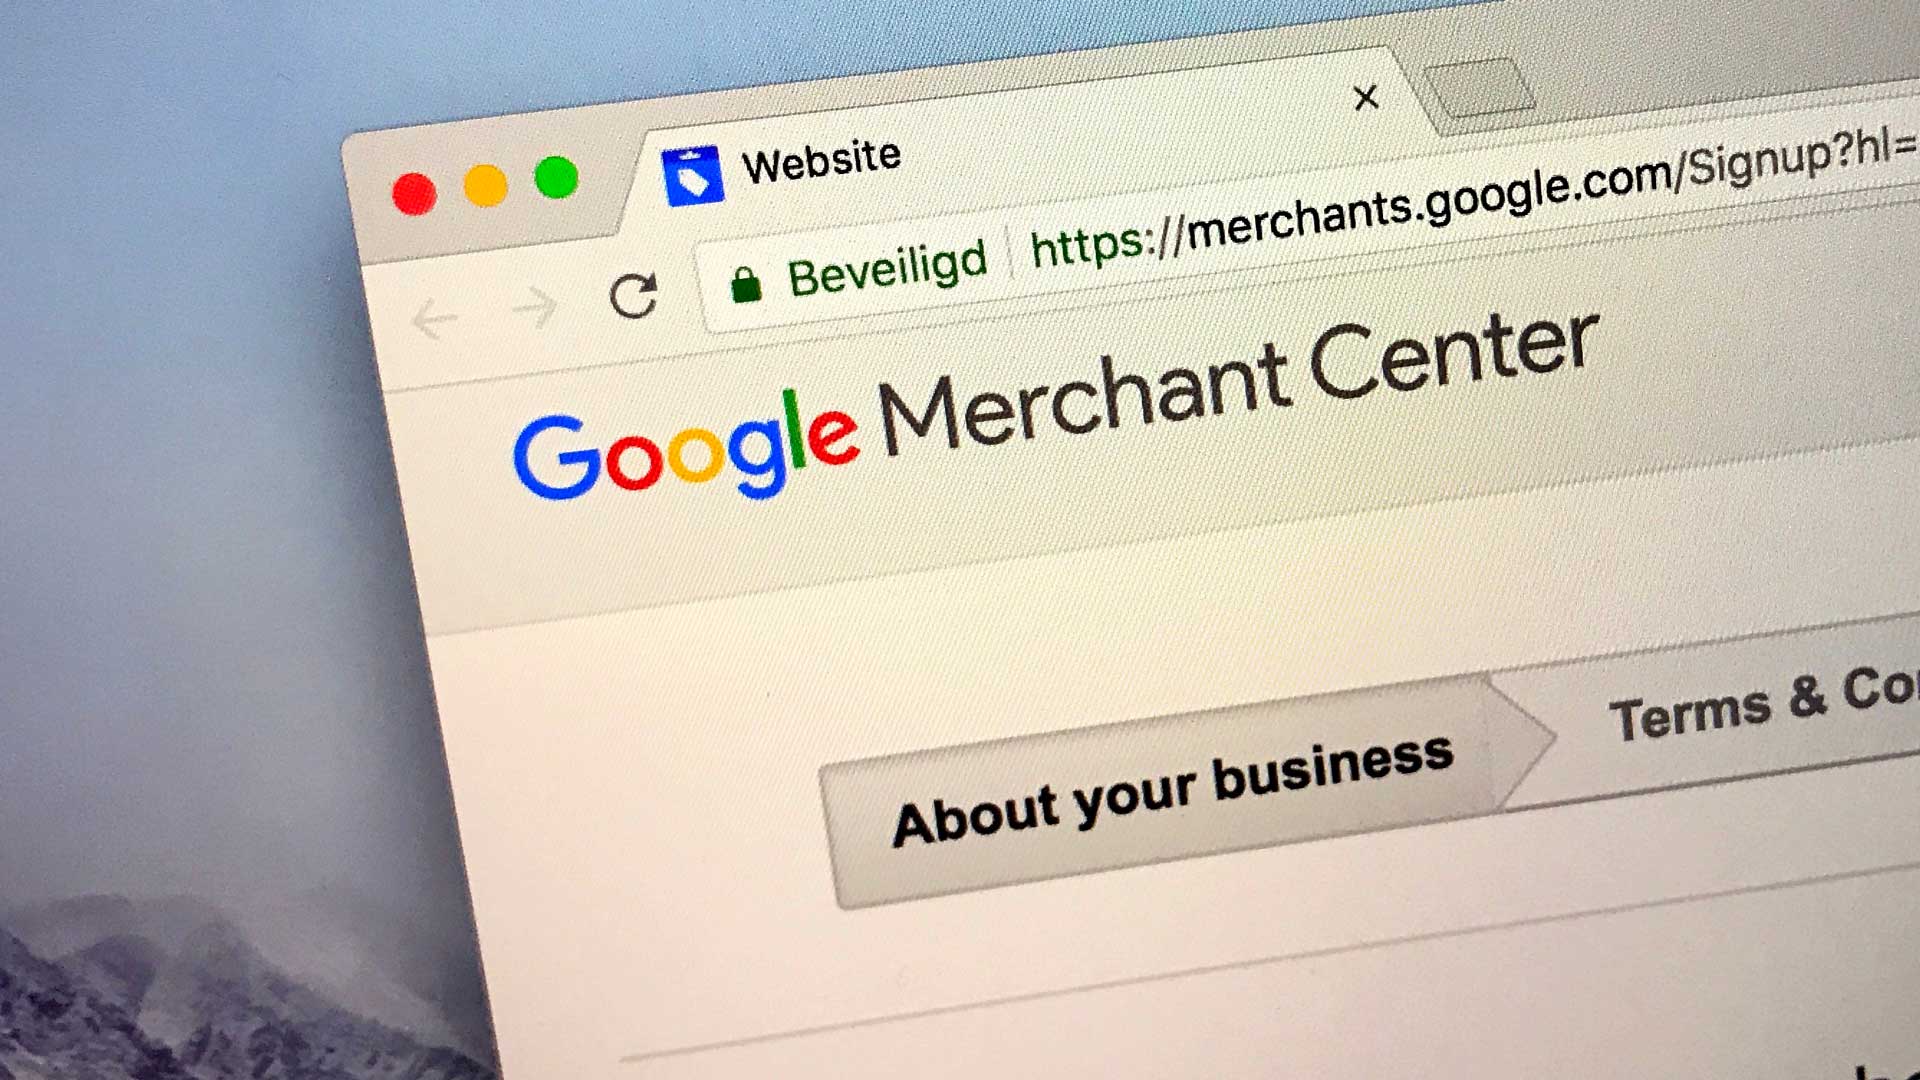 Shoppers may soon be able to message merchants via Google Shopping